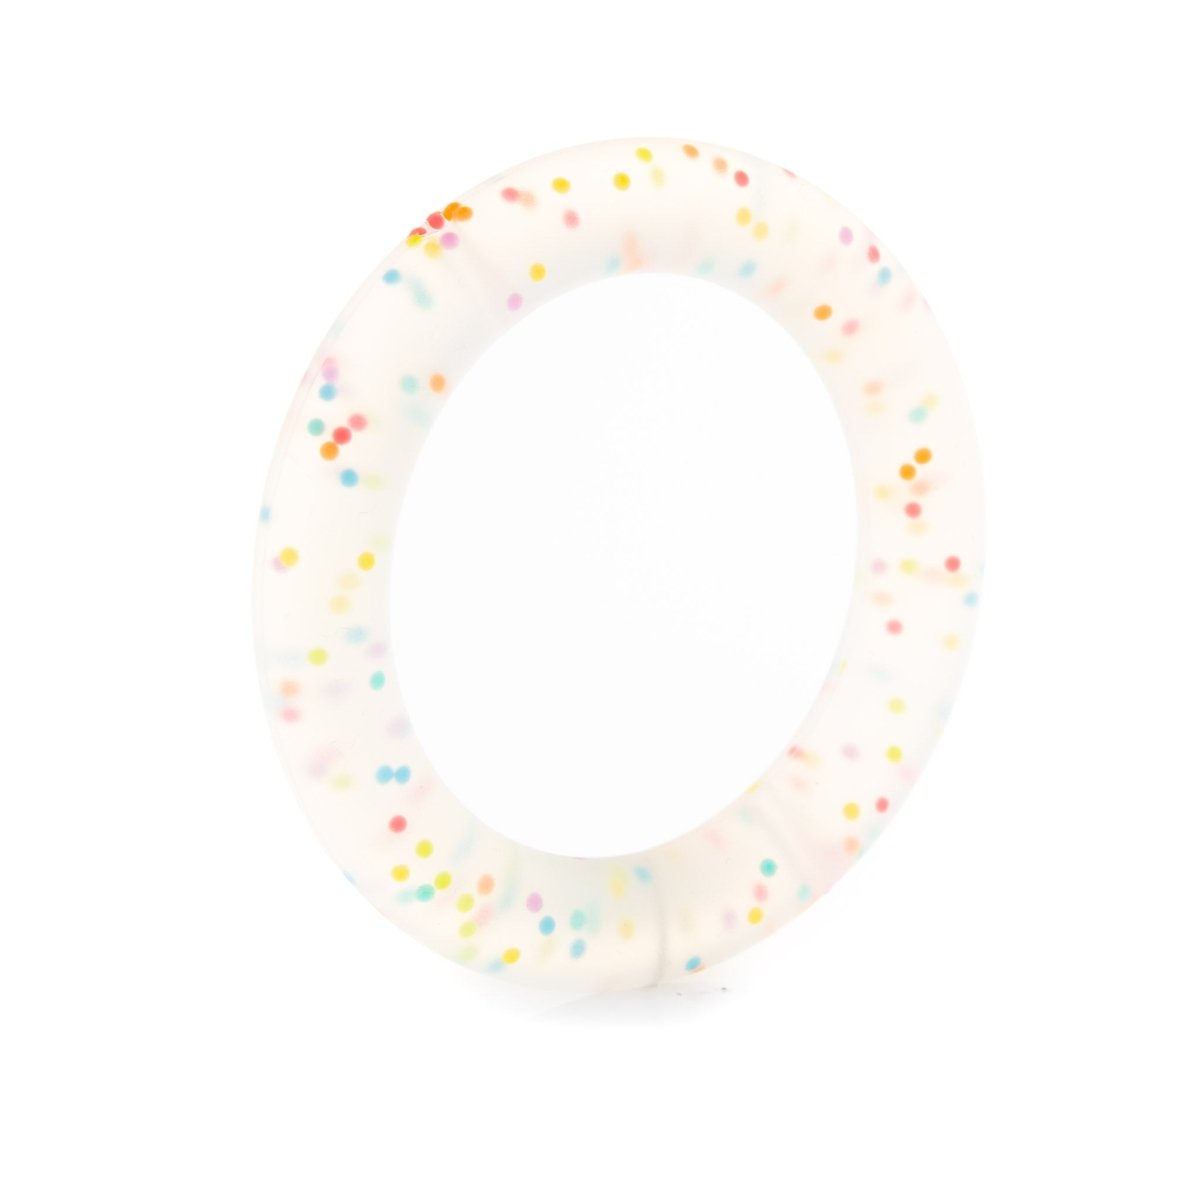 Silicone Teethers and Pendants Teething Rings Rainbow Sprinkles from Cara & Co Craft Supply